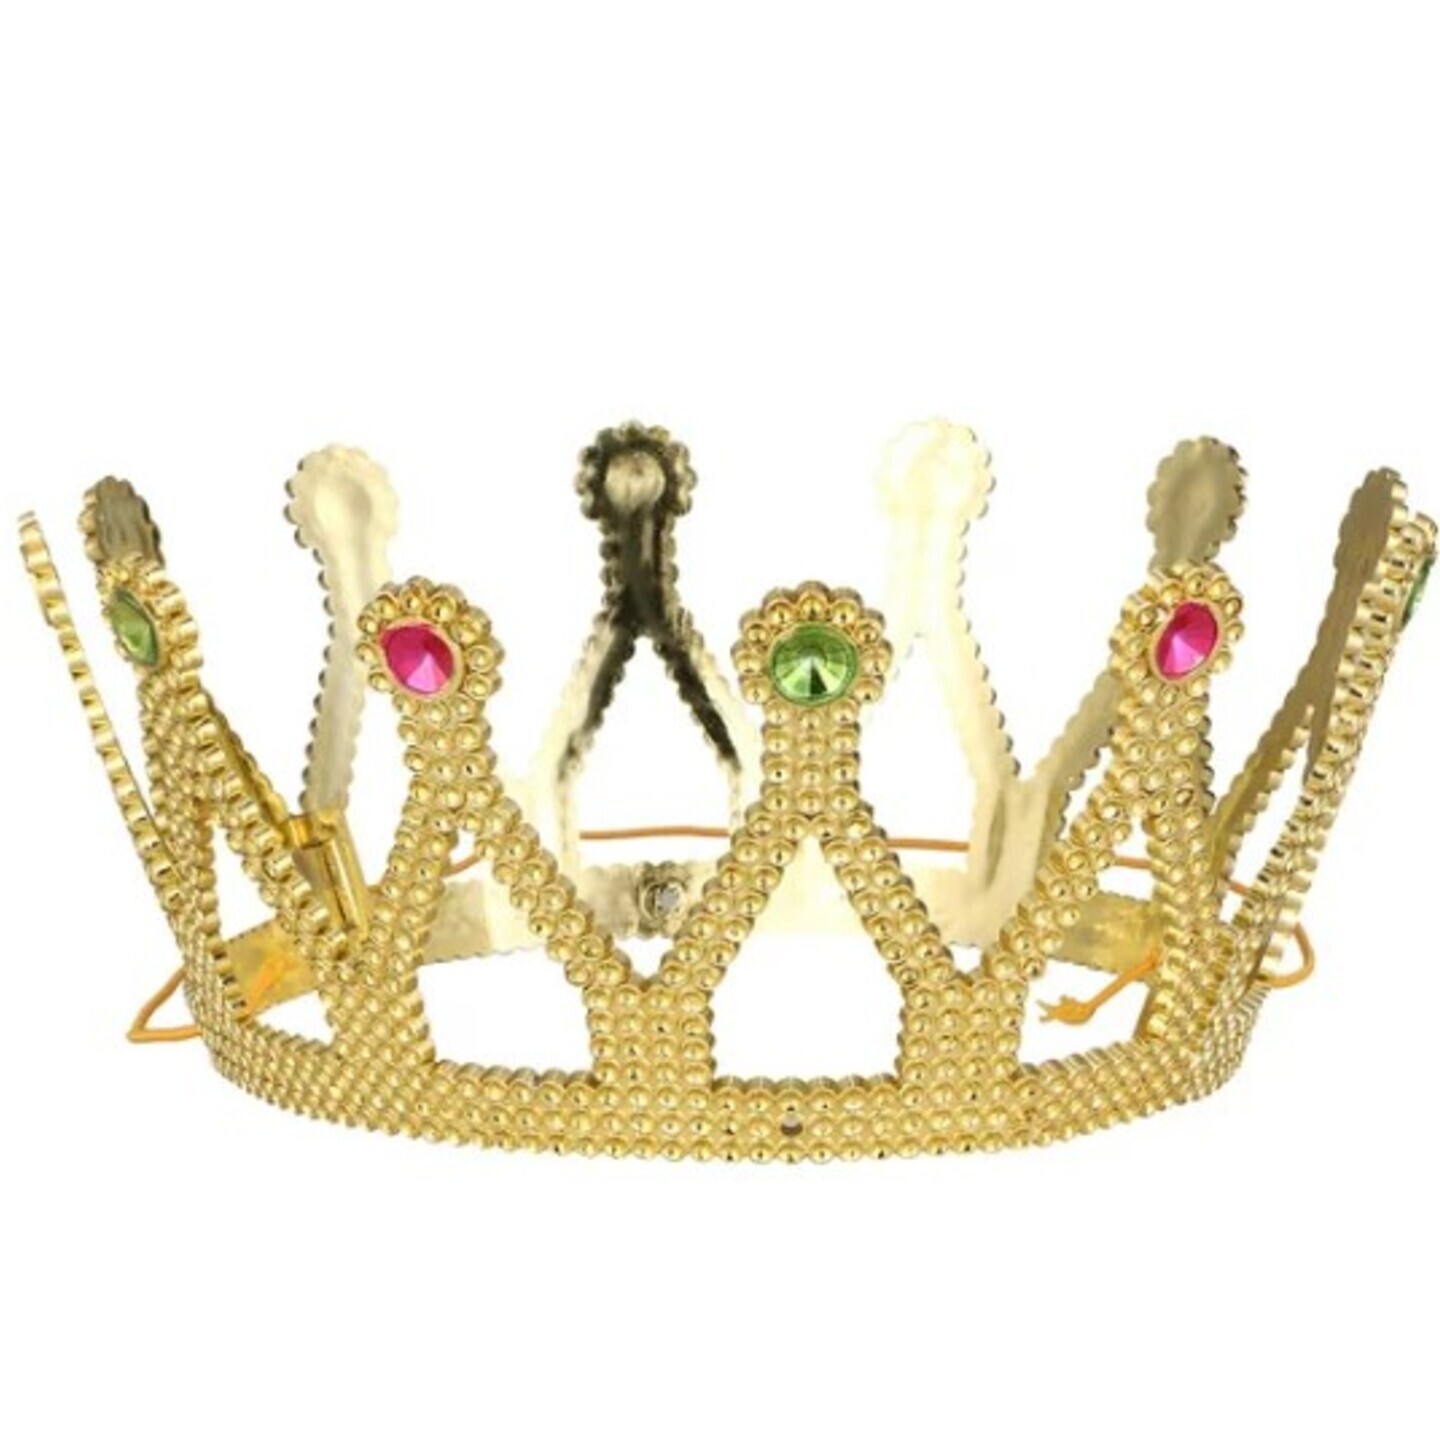 Queen Tiara Party Accessory for Cosplay Costume Party (Gold)